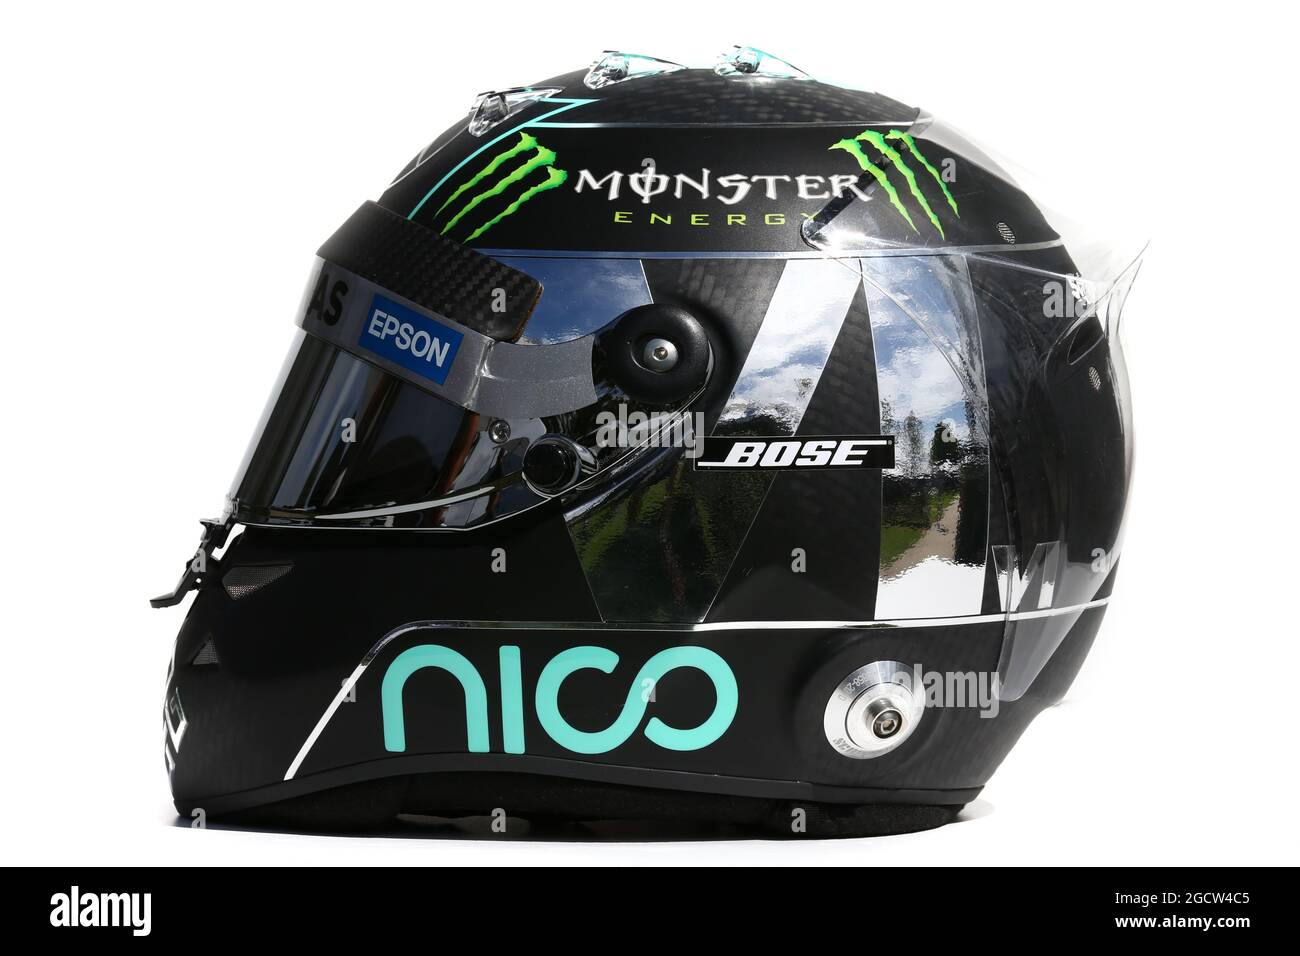 Page 2 - F1 Helmet Nico High Resolution Stock Photography and Images - Alamy